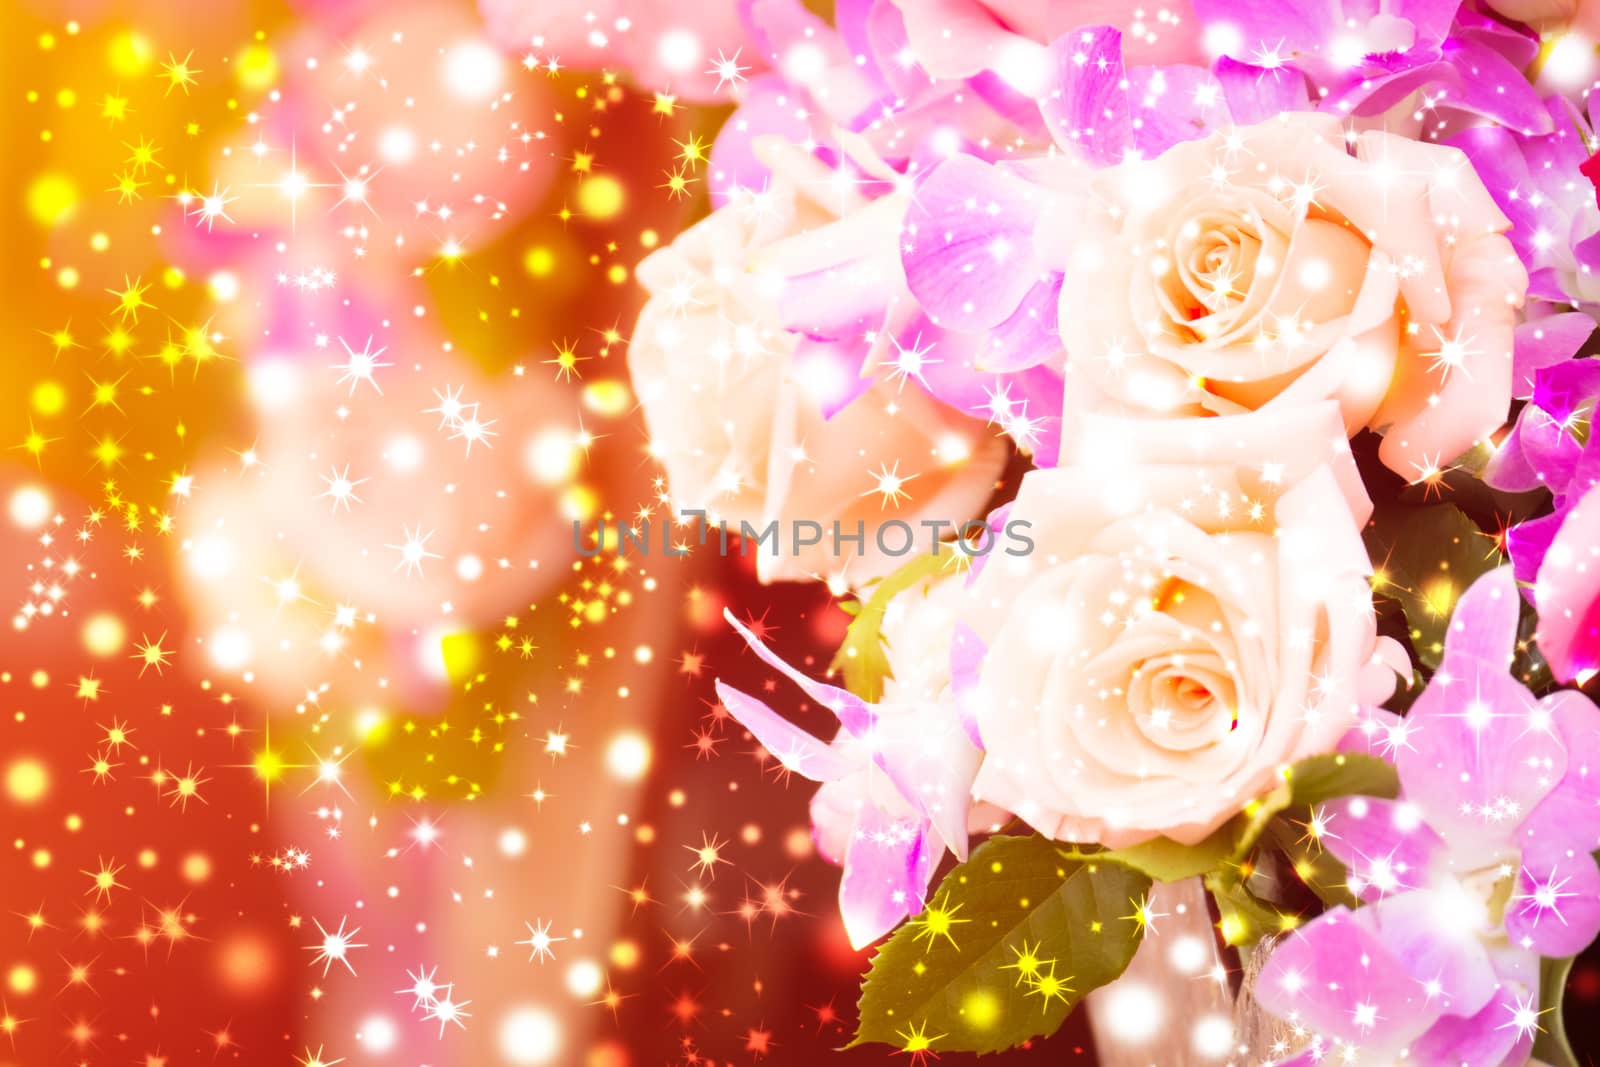 beautiful background with flowers roses, valentine background, flowers background